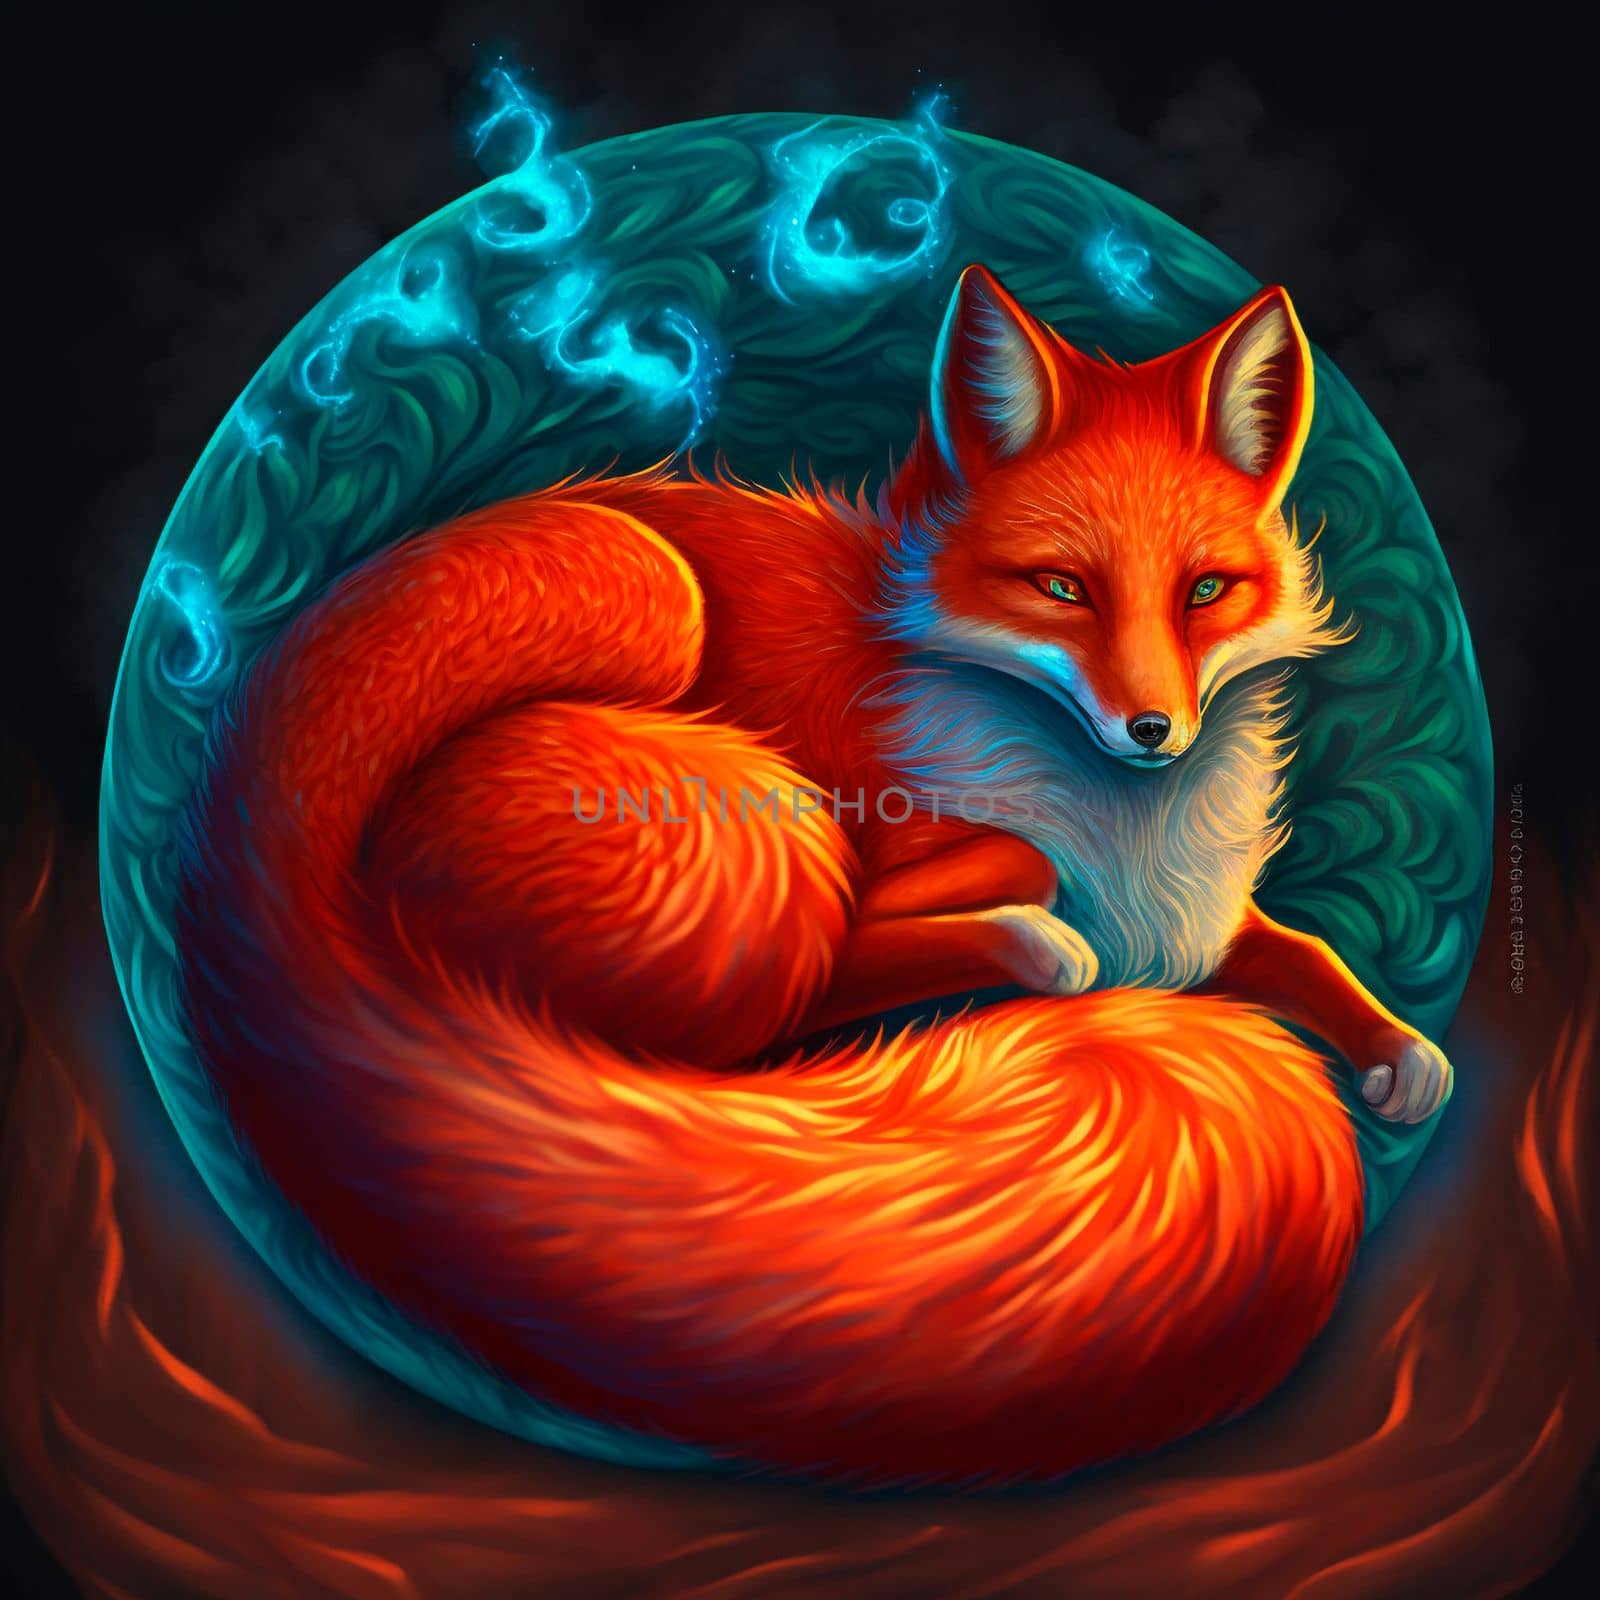 Abstract illustration of a fiery fox by NeuroSky